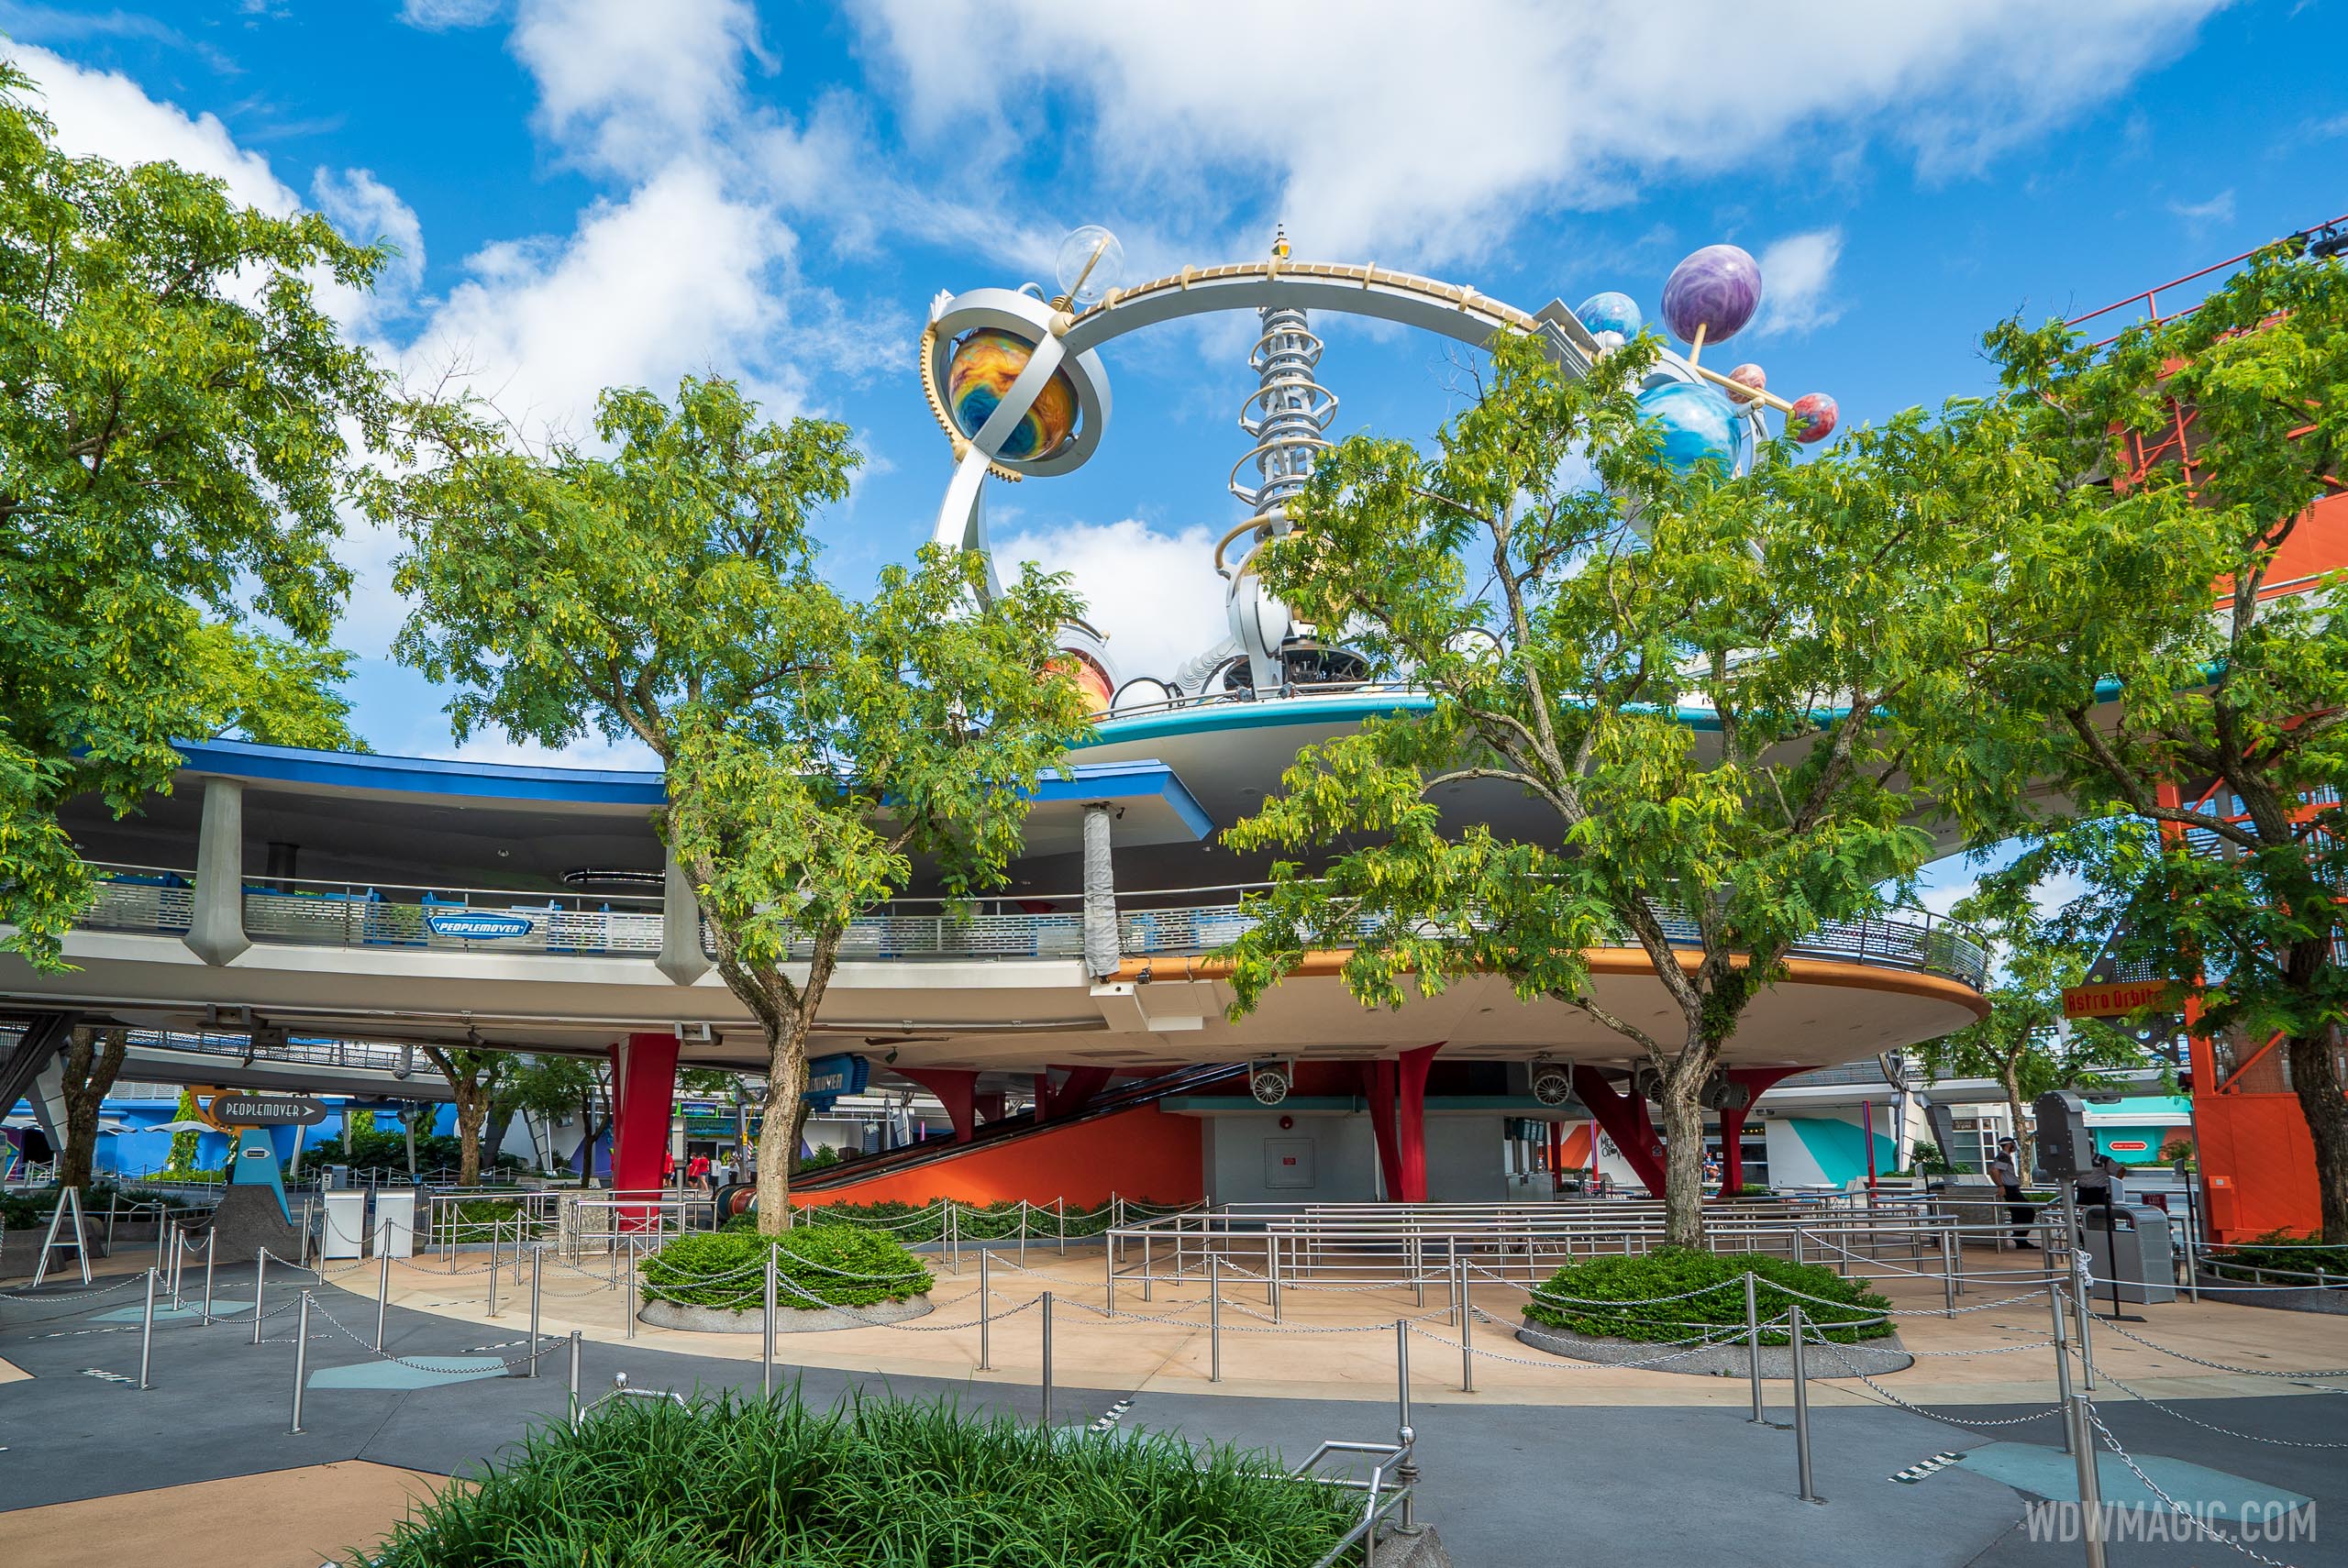 Tommorowland Transit Authority PeopleMover closed - July 2020